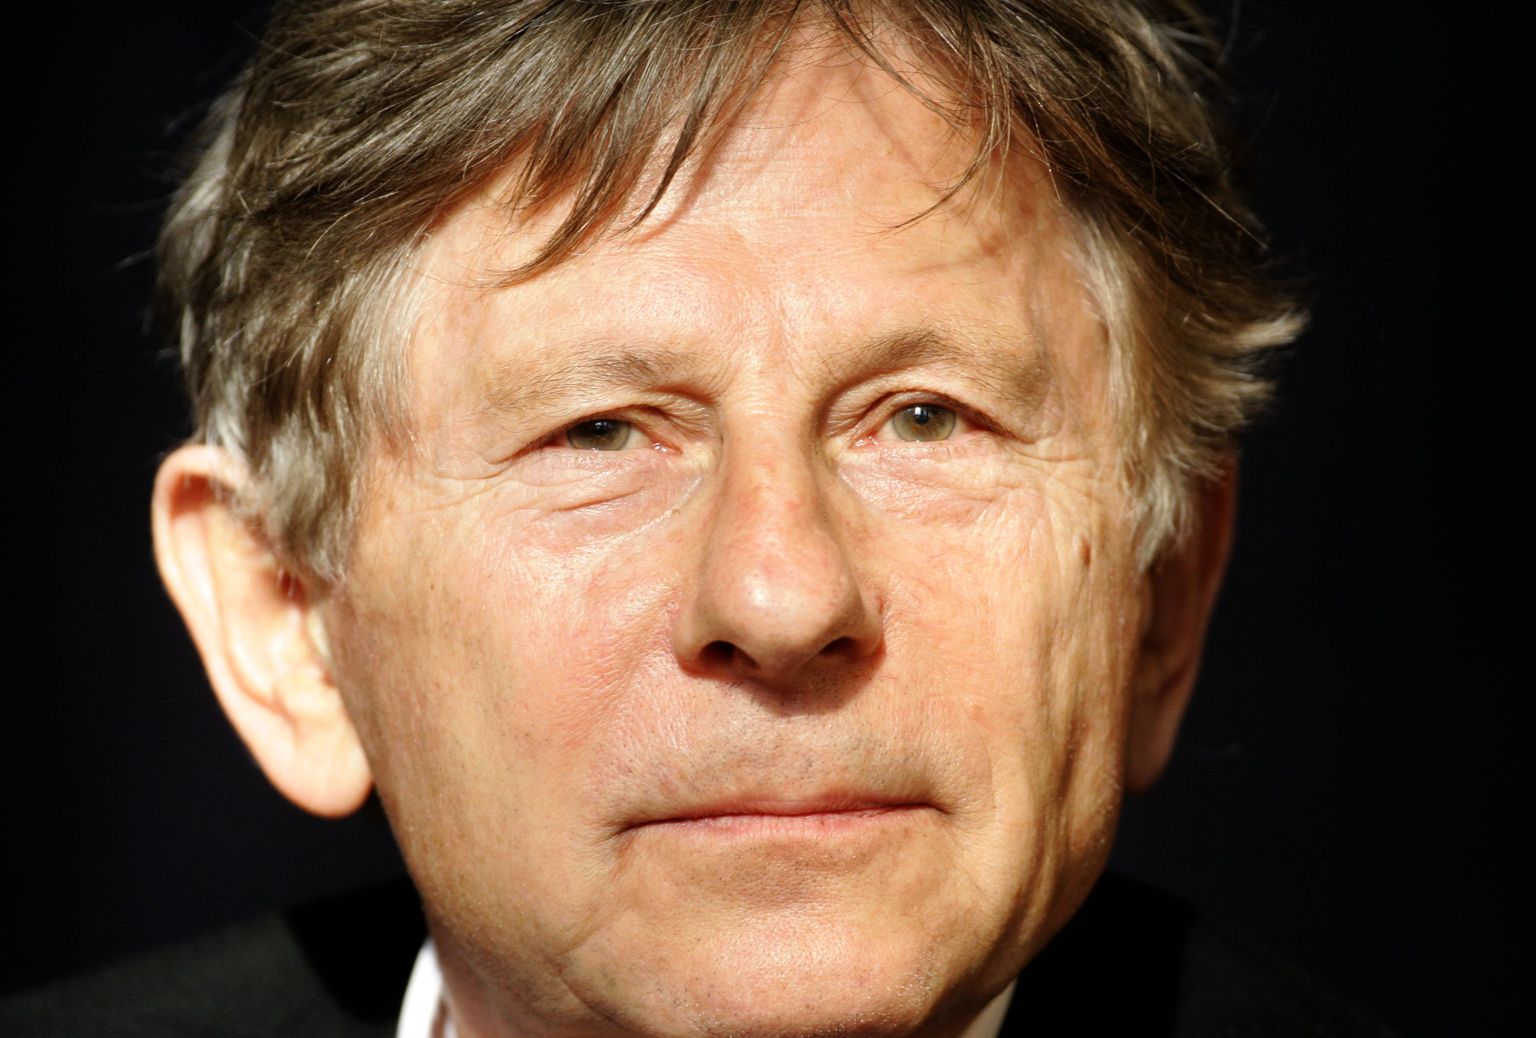 File photo of film Director Roman Polanski attending a news conference to present his musical 'Tanz der Vampire' ('Dance of the Vampires') in Berlin October 11, 2006.  Polanski was arrested on September 26, 2009 at the request of the United States on trying to enter Switzerland on Saturday evening to receive a prize, the Zurich Film Festival said in a statement on Sunday.  Polanski's arrest was in connection to an arrest warrant issued by U.S. authorities in 1978, the statement said.  REUTERS/Arnd Wiegmann/files      (GERMANY ENTERTAINMENT CRIME LAW)